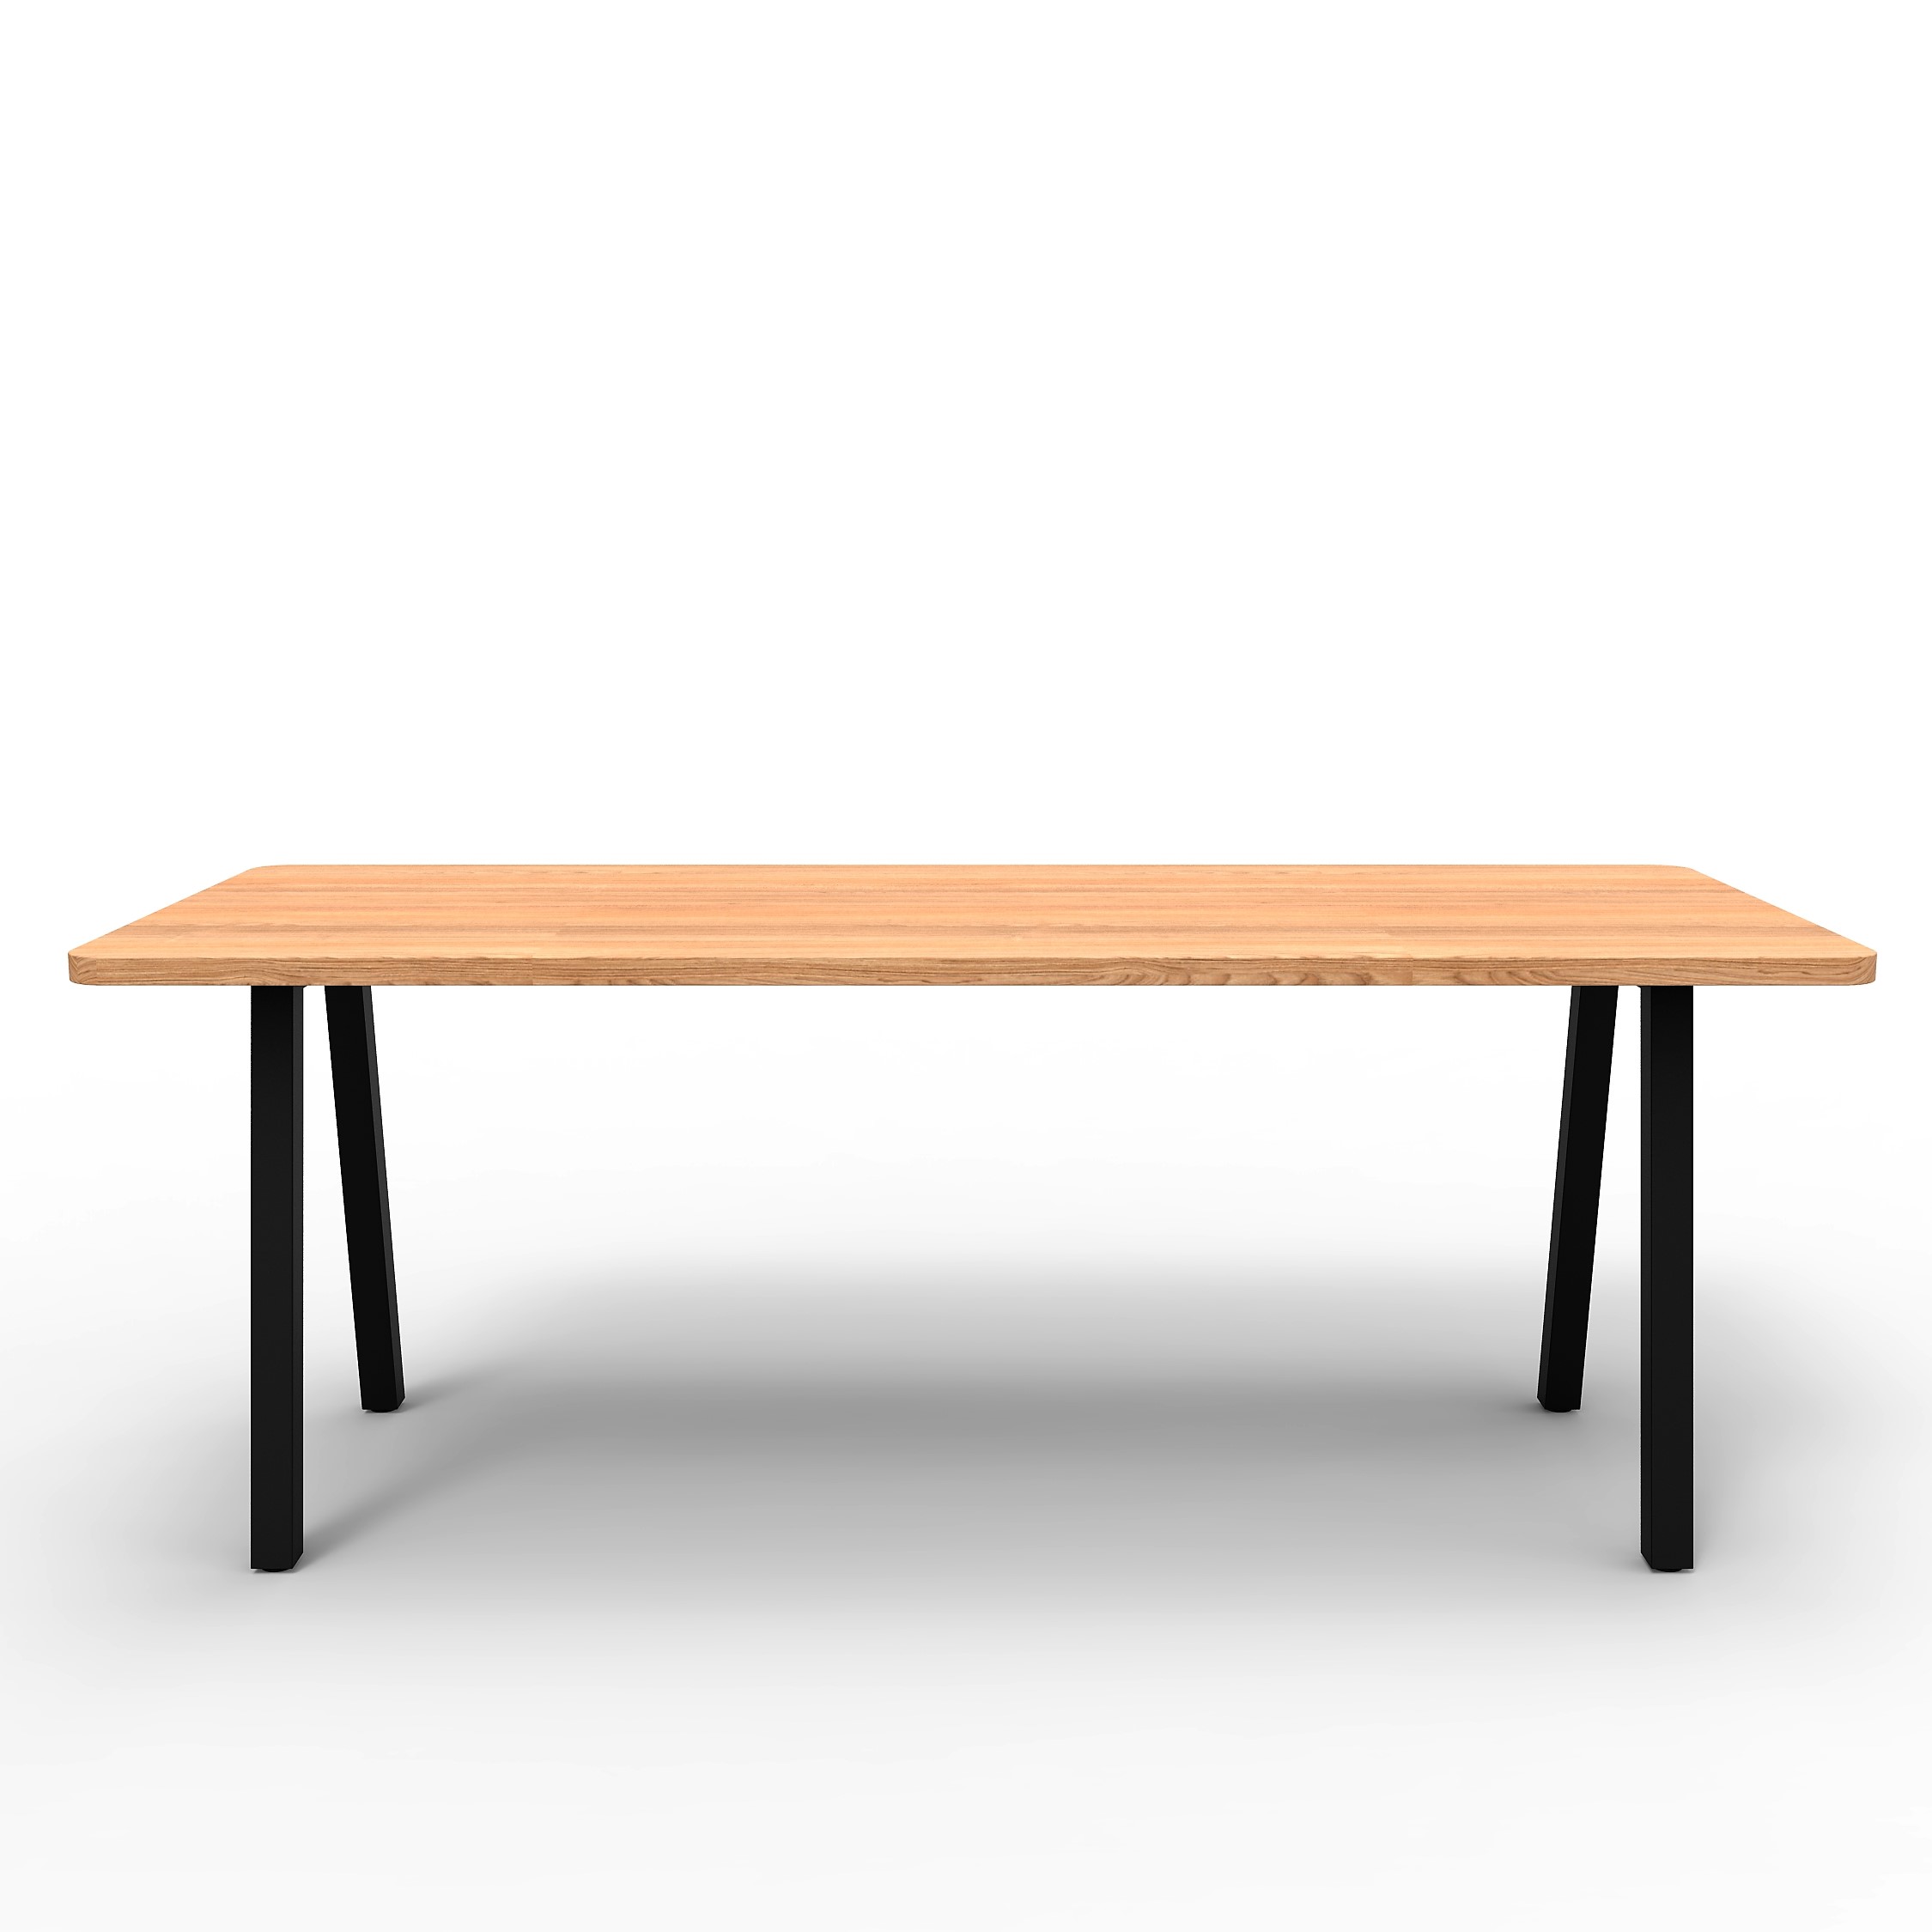 Hudson dining table base with solid wooden table top.